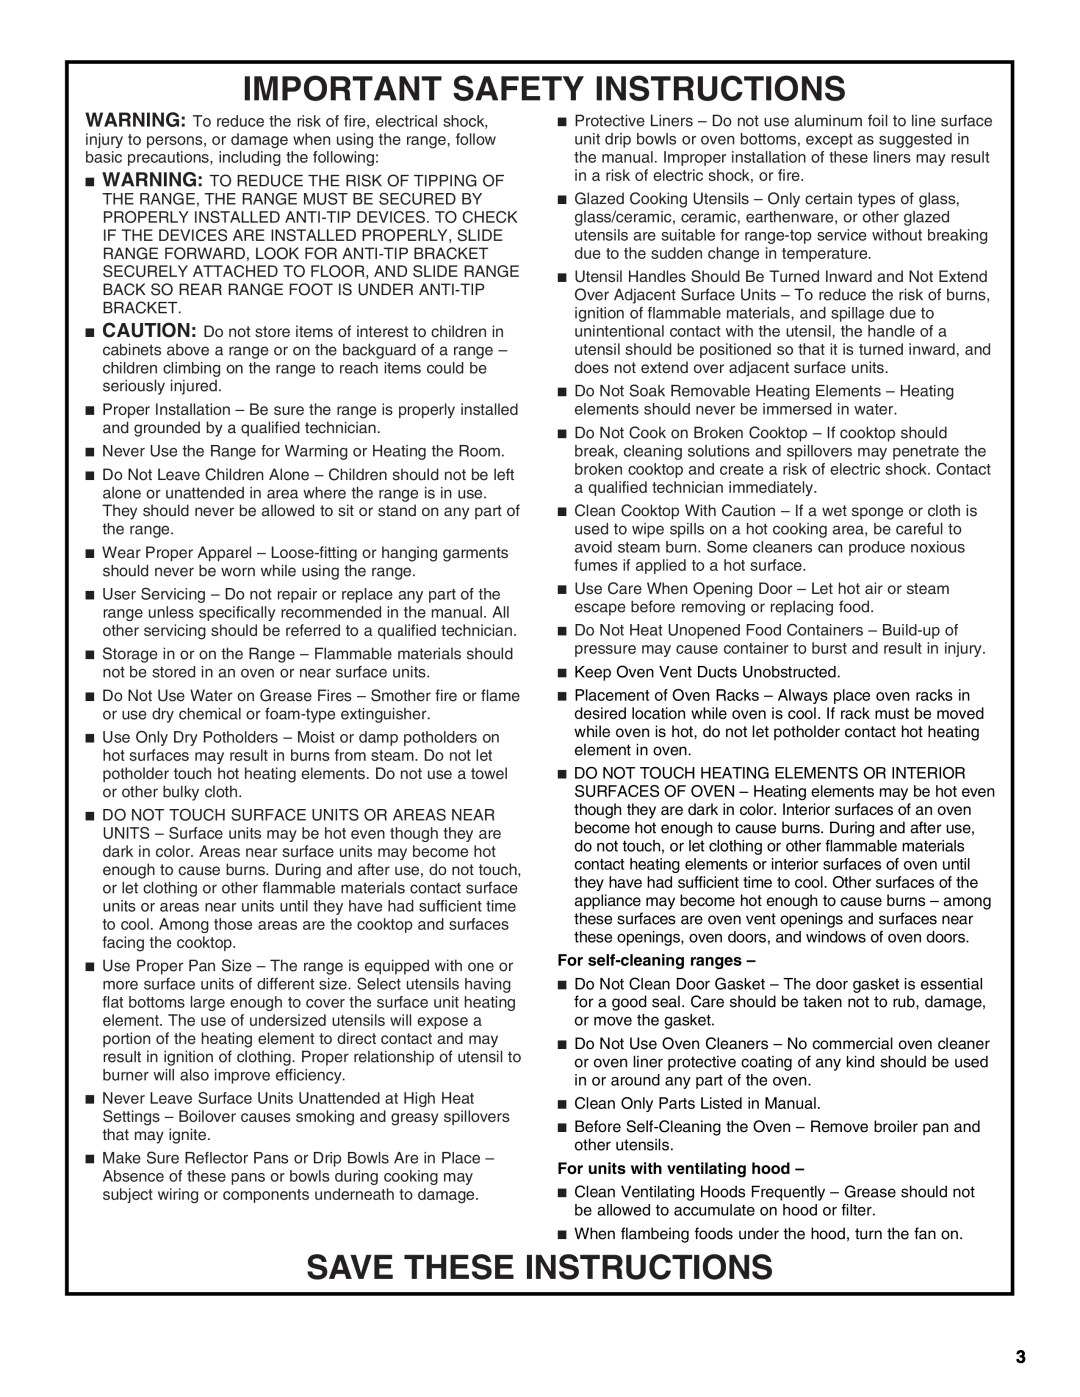 Whirlpool W10200357C warranty Important Safety Instructions, Save These Instructions, For self-cleaning ranges 